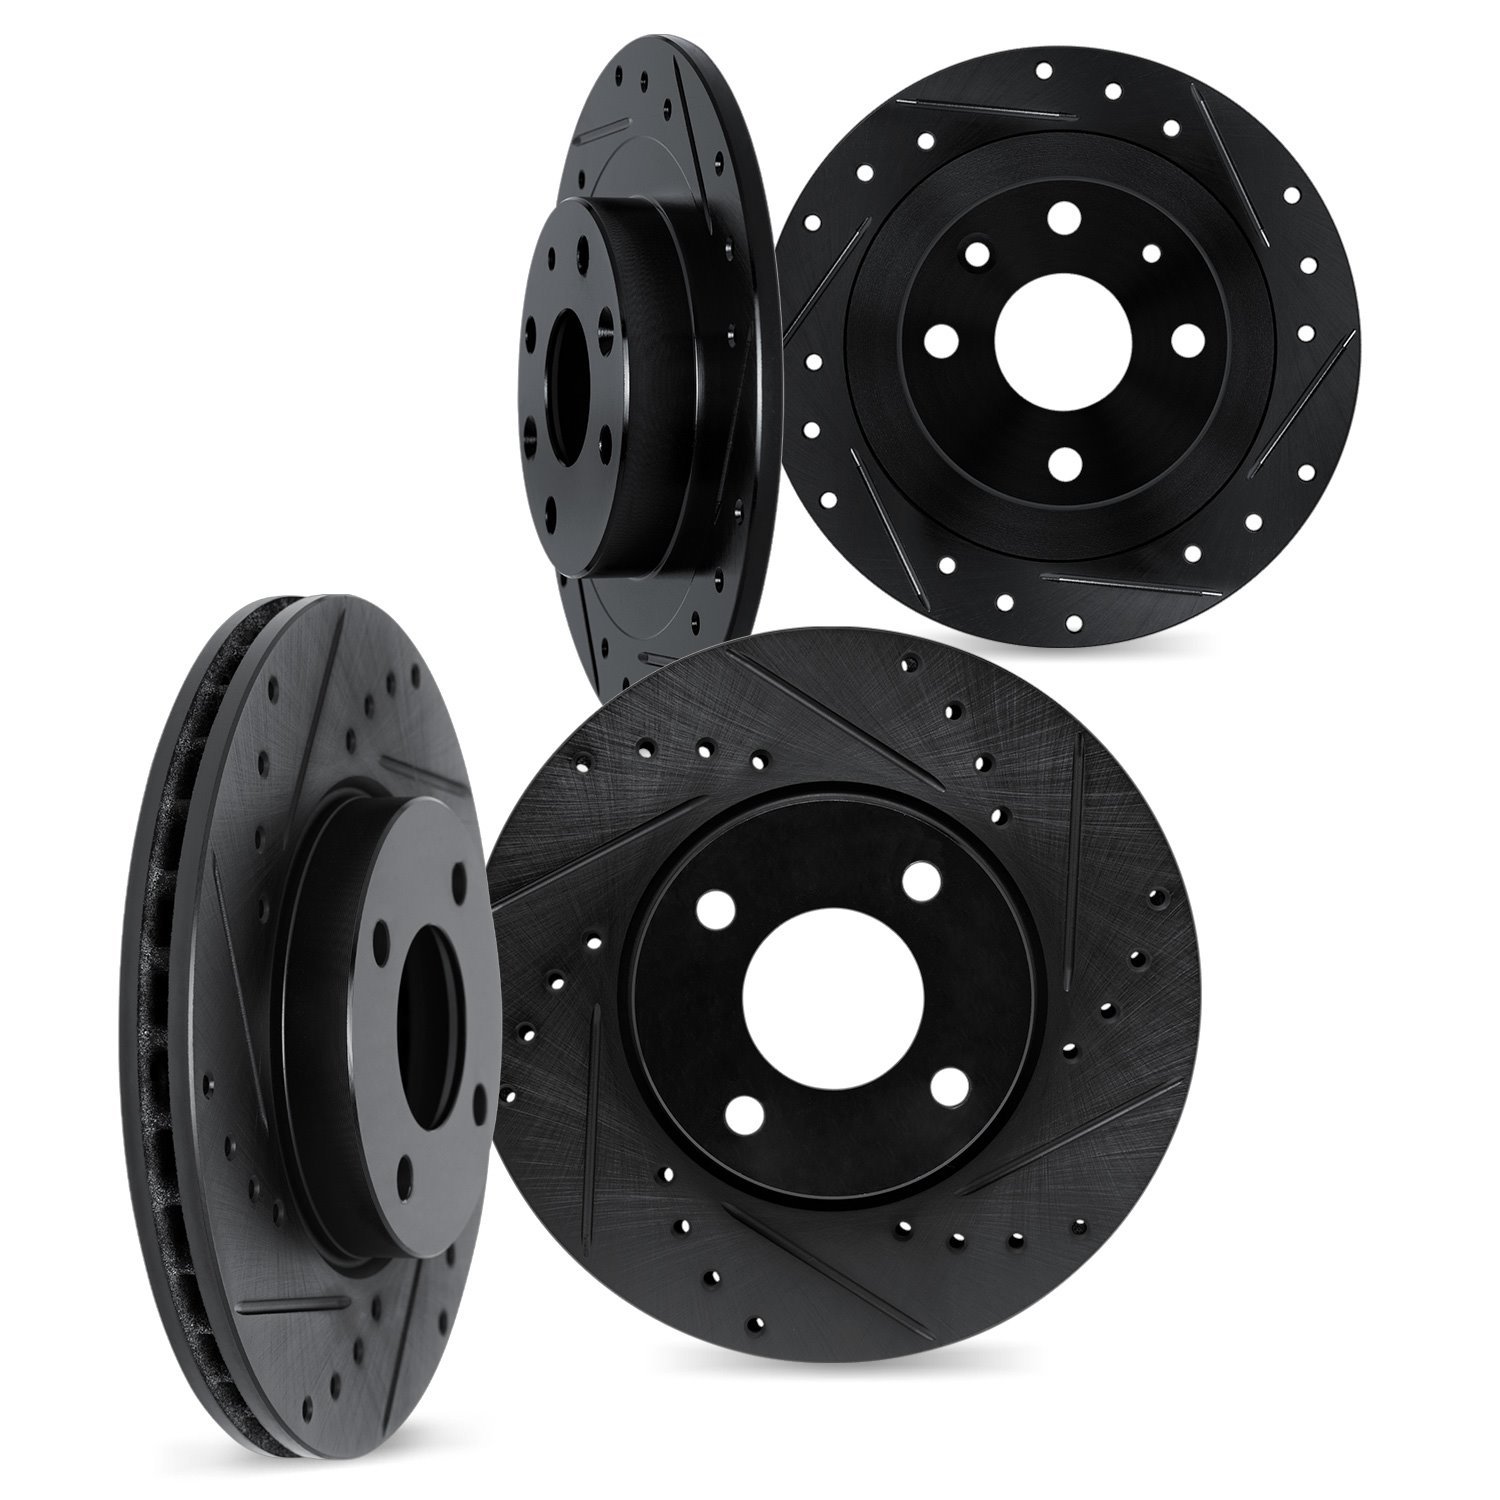 8004-80000 Drilled/Slotted Brake Rotors [Black], Fits Select Multiple Makes/Models, Position: Front and Rear